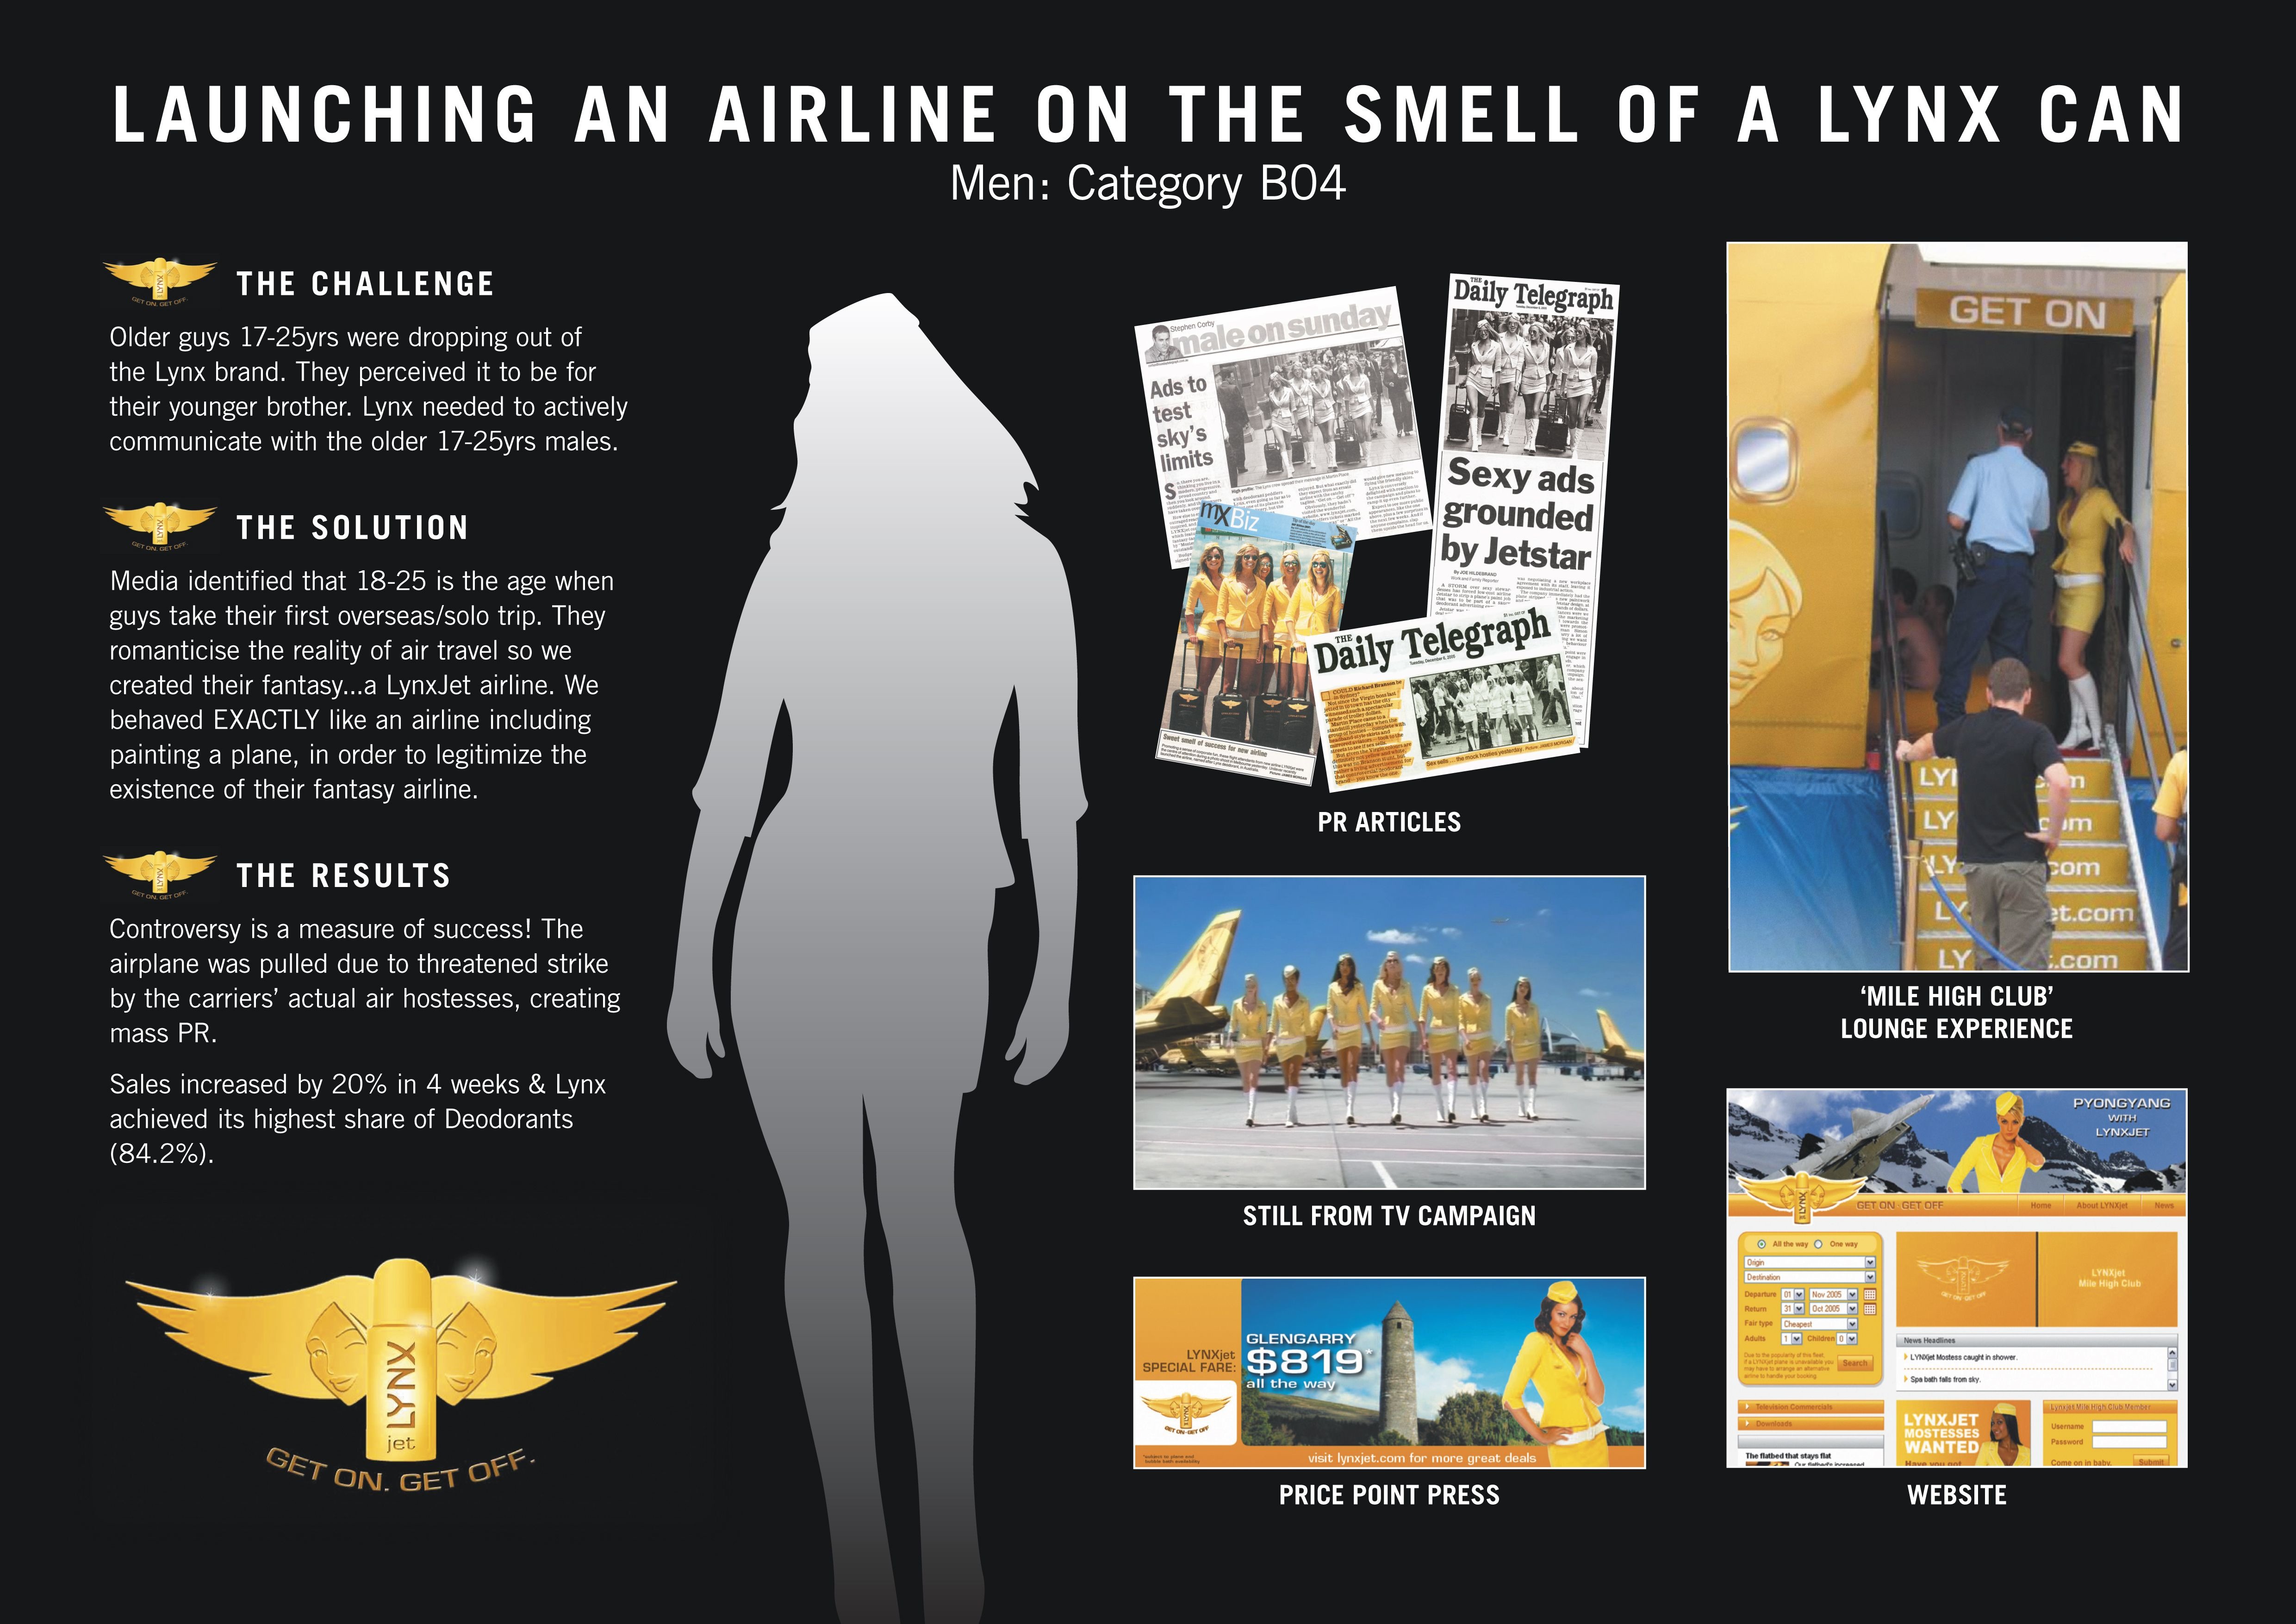 LAUNCHING AN AIRLINE ON THE SMELL OF A LYNX CAN, Entry